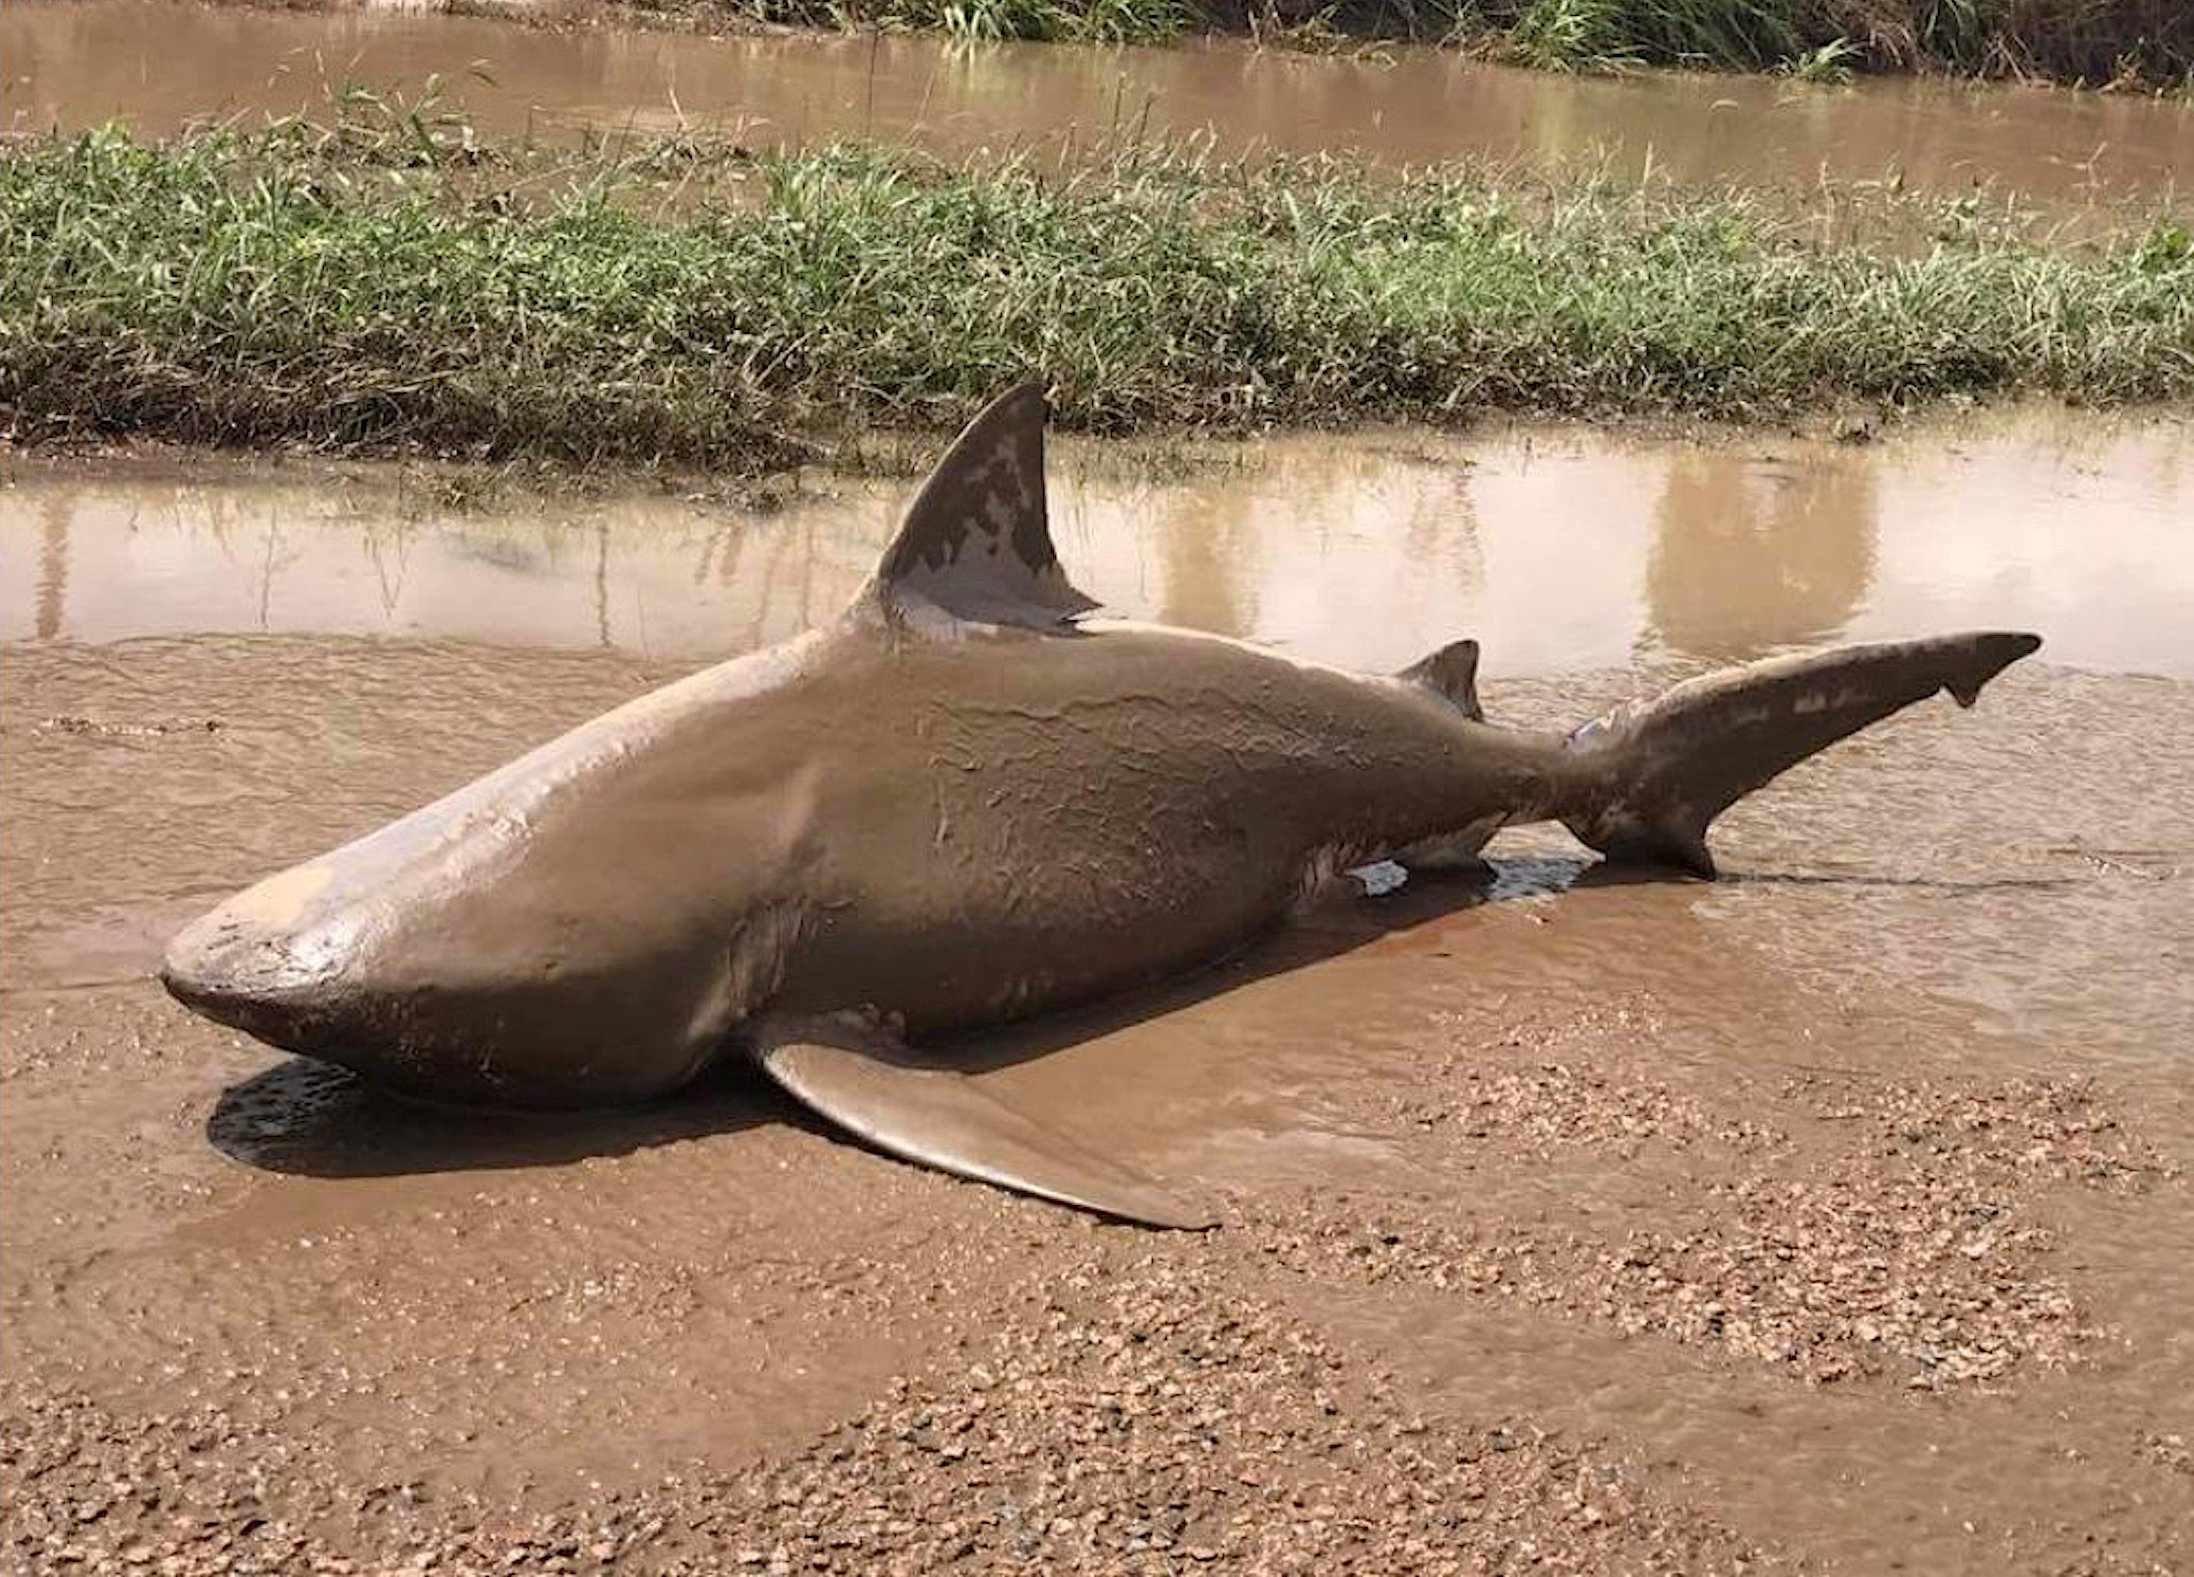 AYR 2017-03-31 An undated supplied image released March 30, 2017, shows a bull shark that was found in a puddle near the town of Ayr, located south of Townsville, following flooding in the area from heavy rains associated with Cyclone Debbie in Australia. Queensland Fire and Emergency Services/Handout via REUTERS ATTENTION EDITORS - THIS IMAGE WAS PROVIDED BY A THIRD PARTY. EDITORIAL USE ONLY. NO RESALES. NO ARCHIVE. TPX IMAGES OF THE DAY Photo: / REUTERS / TT / kod 72000